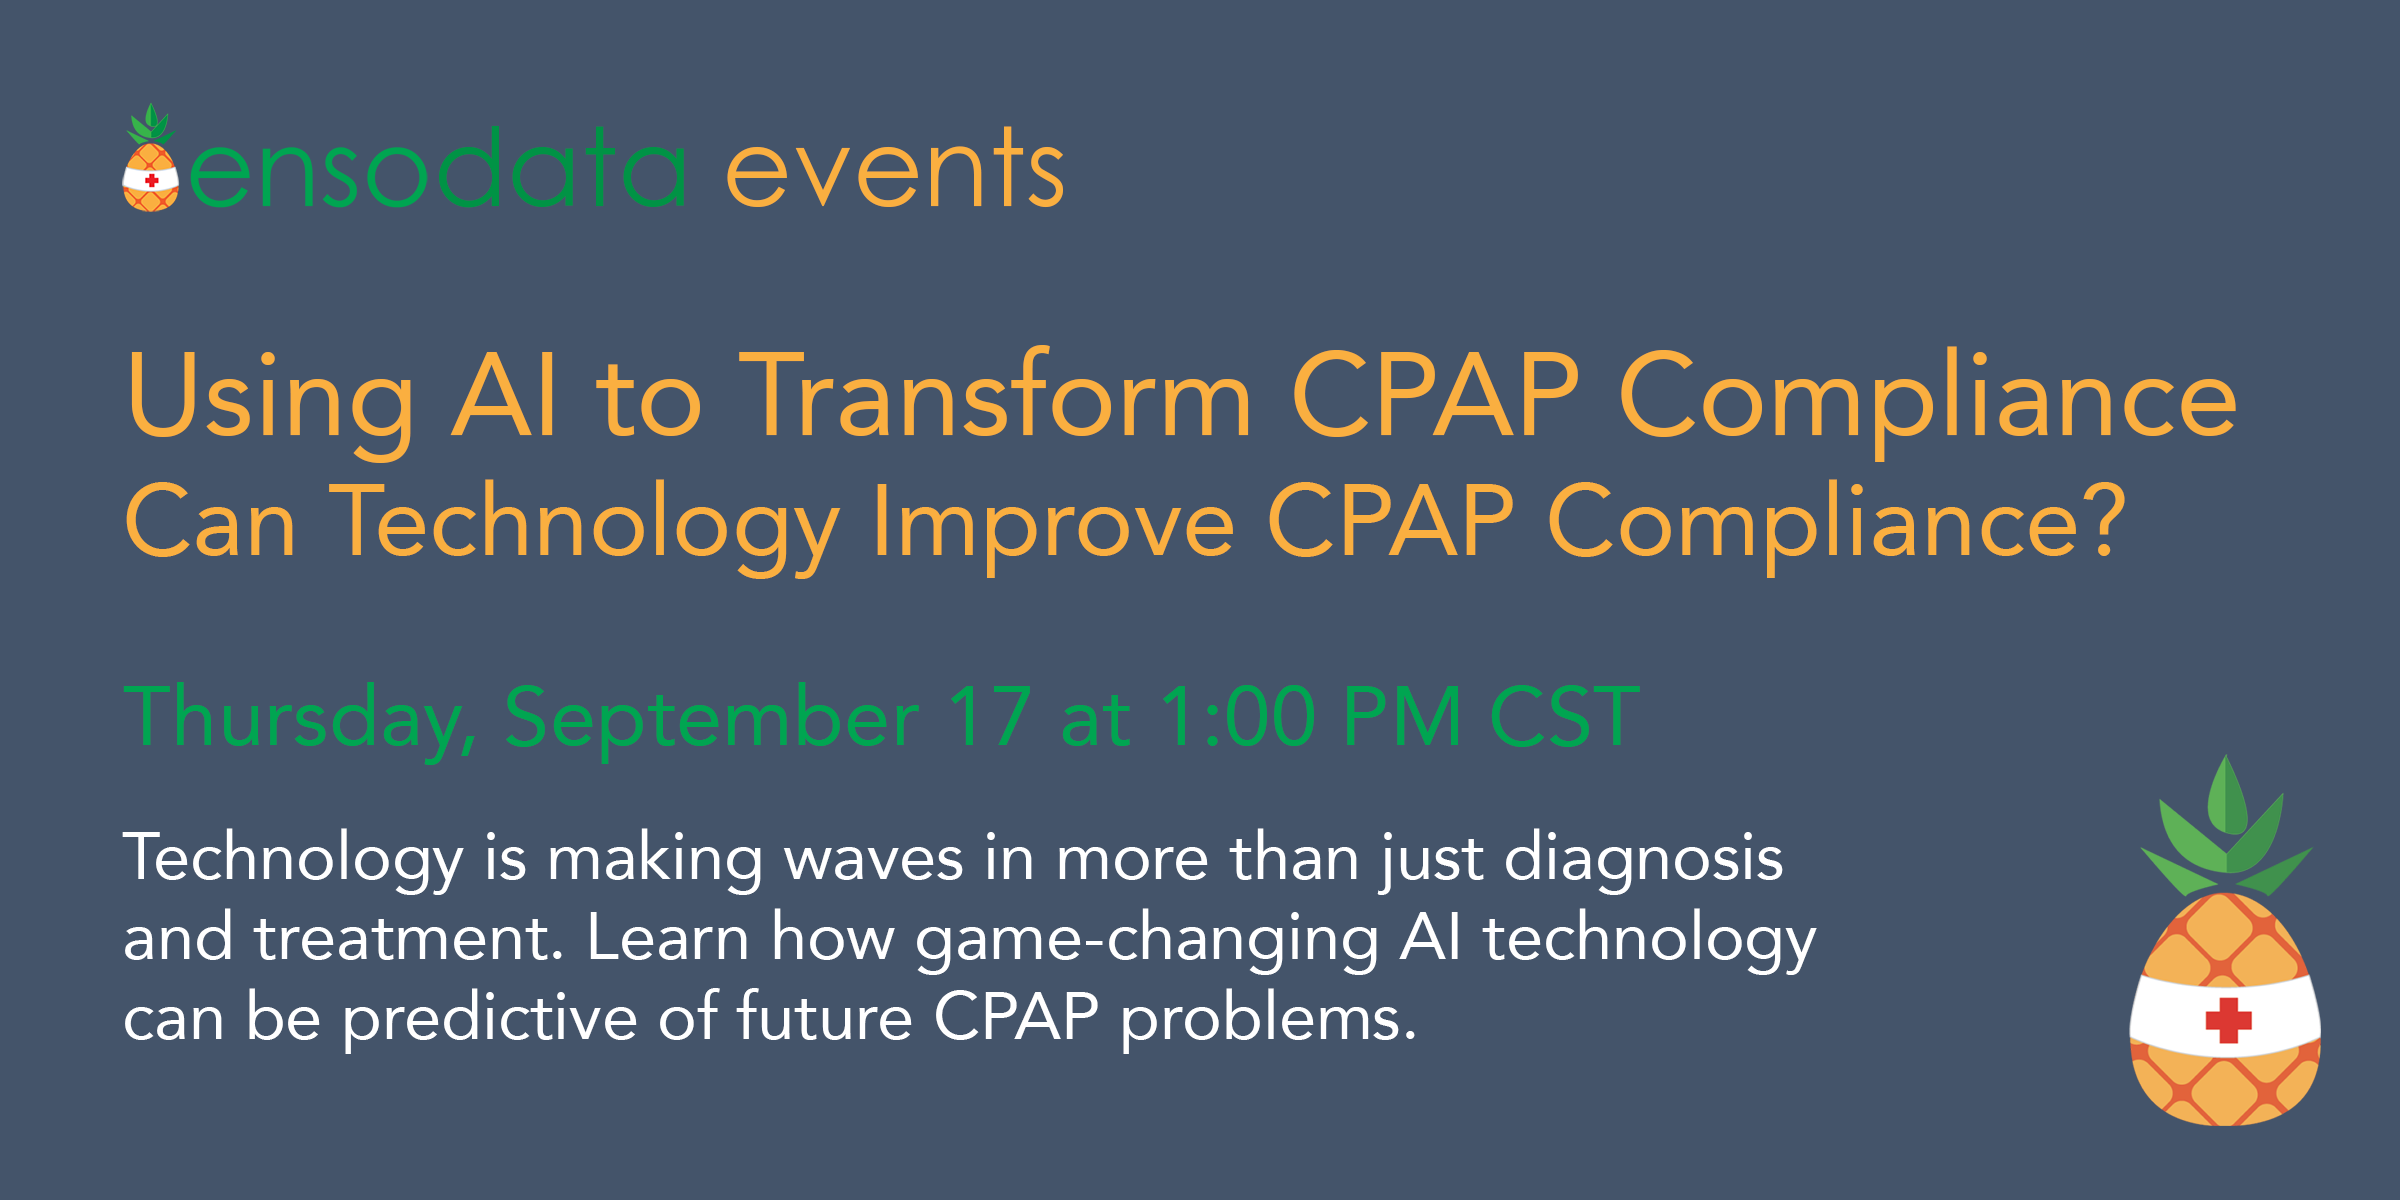 Using AI to Transform CPAP Compliance